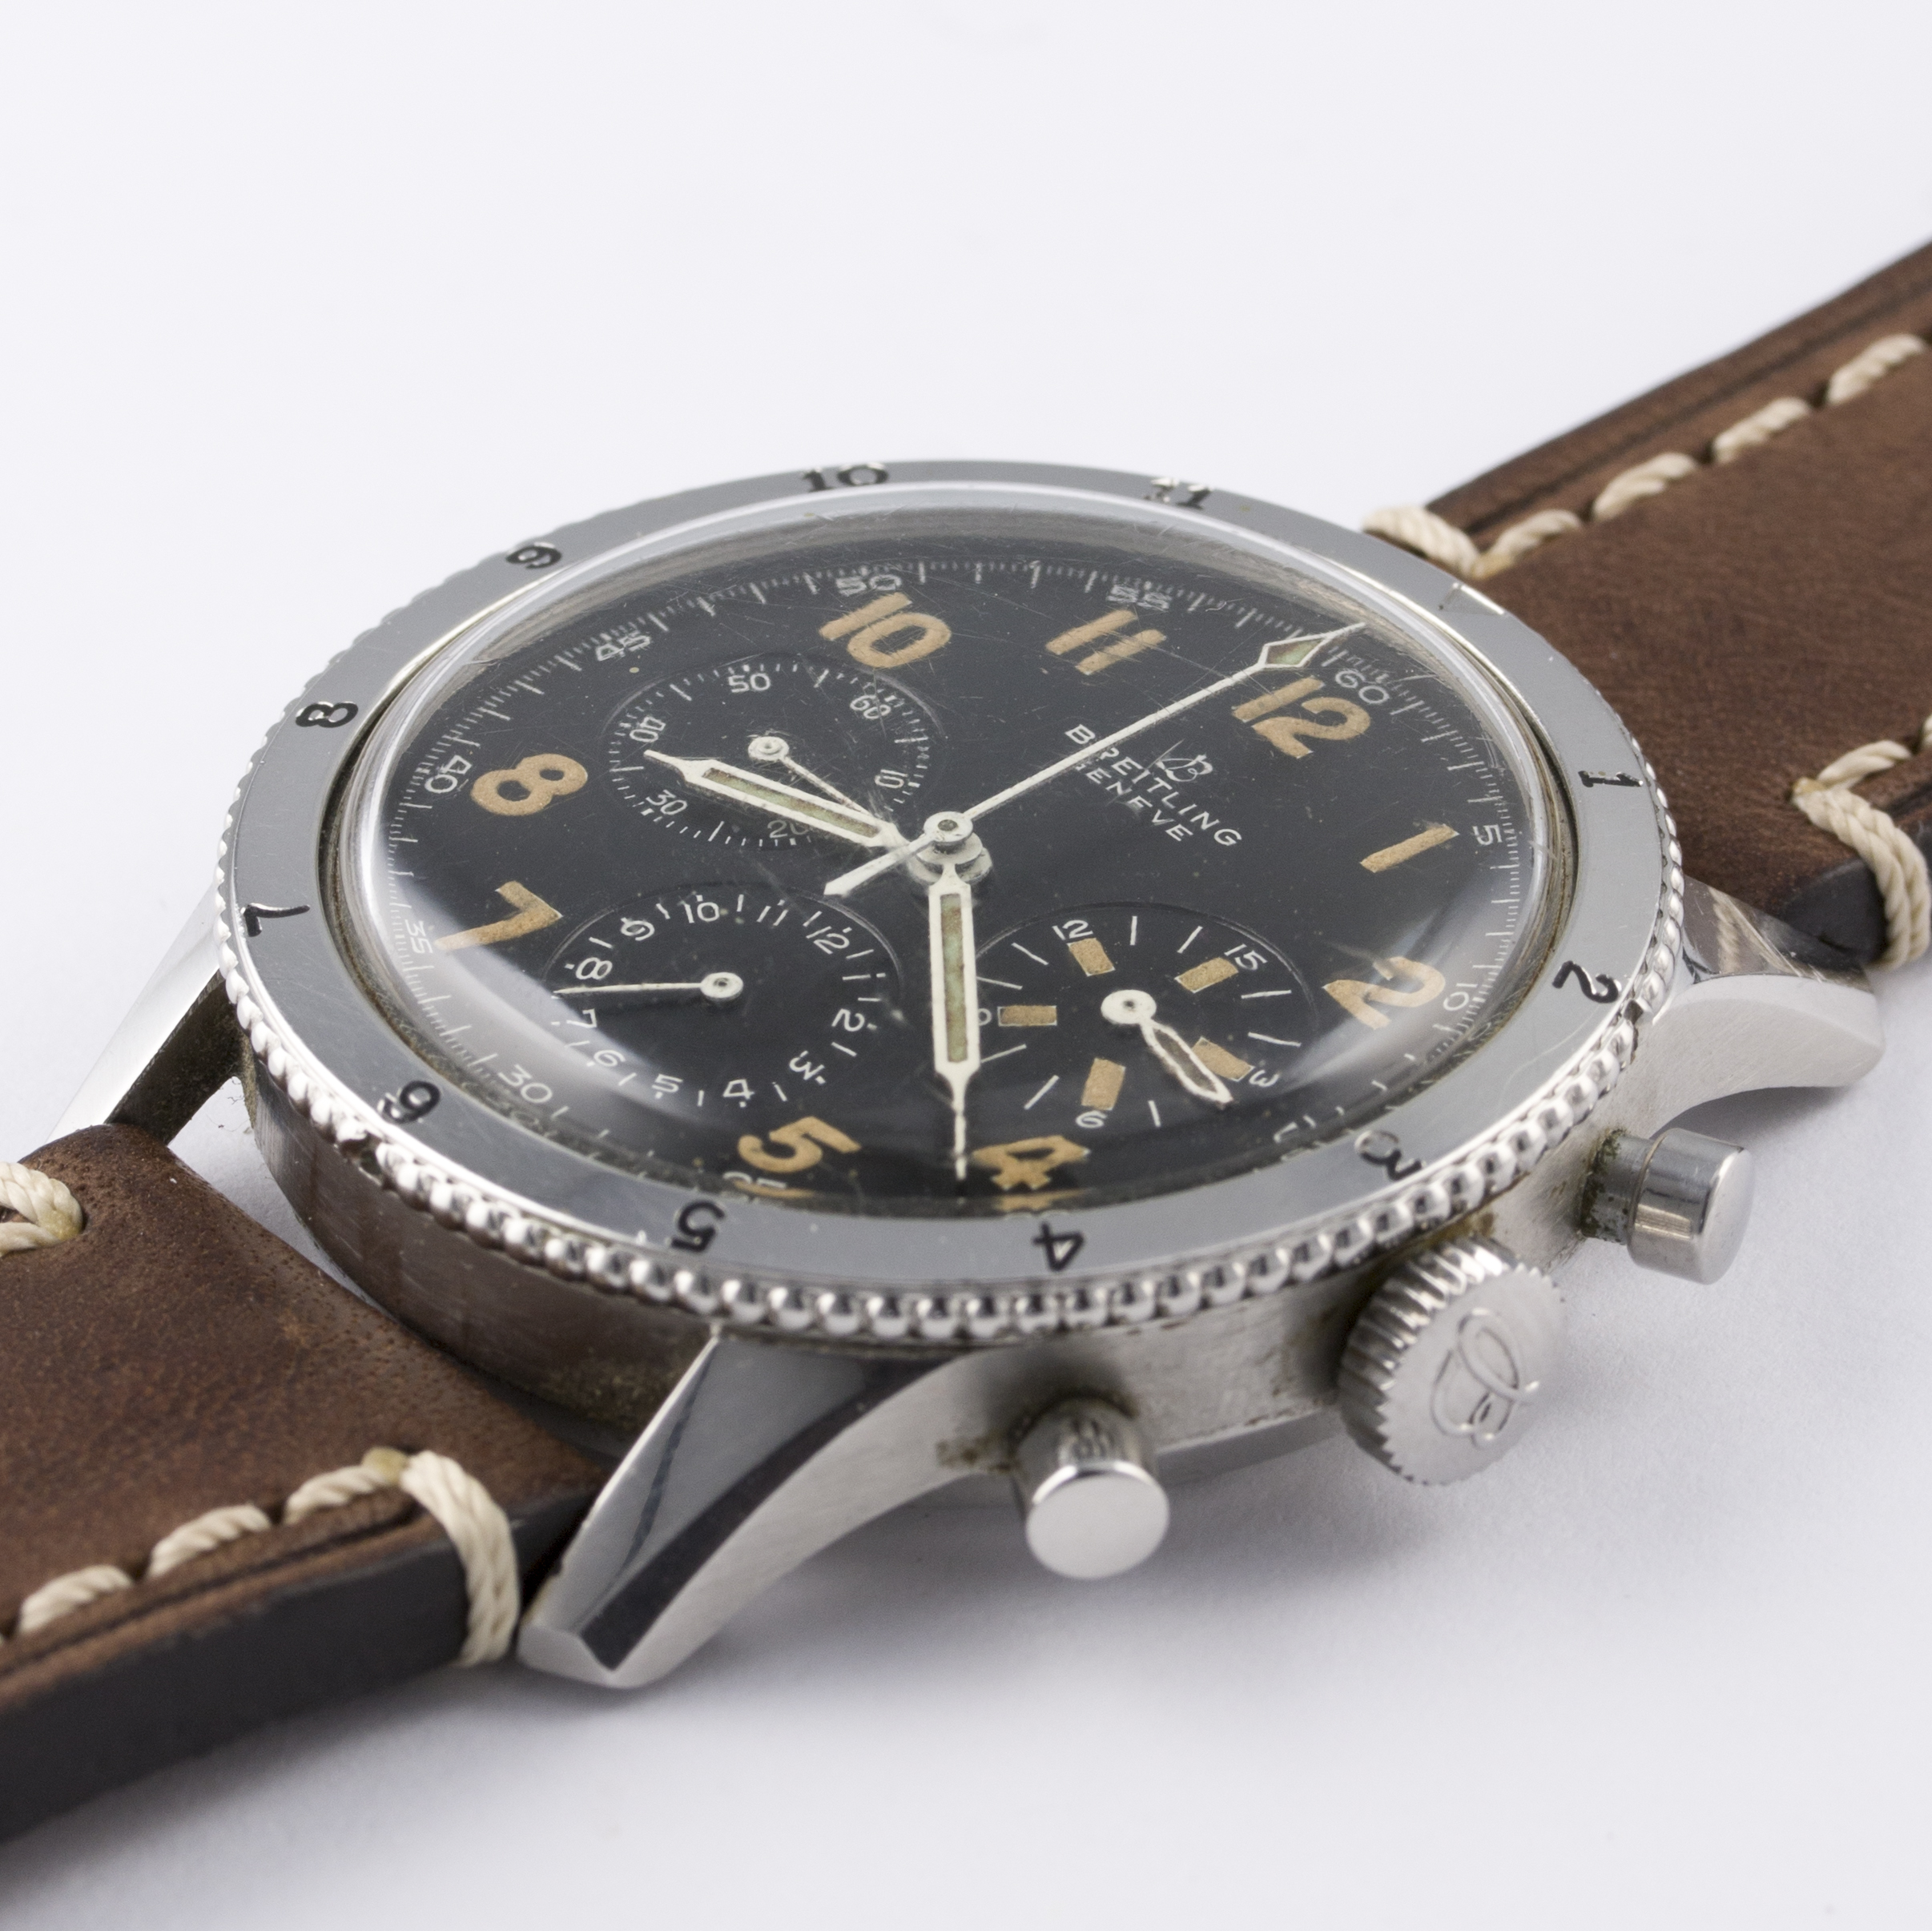 A RARE GENTLEMAN'S STAINLESS STEEL BREITLING AVI CHRONOGRAPH WRIST WATCH CIRCA 1950s, REF. 765 FIRST - Image 4 of 9